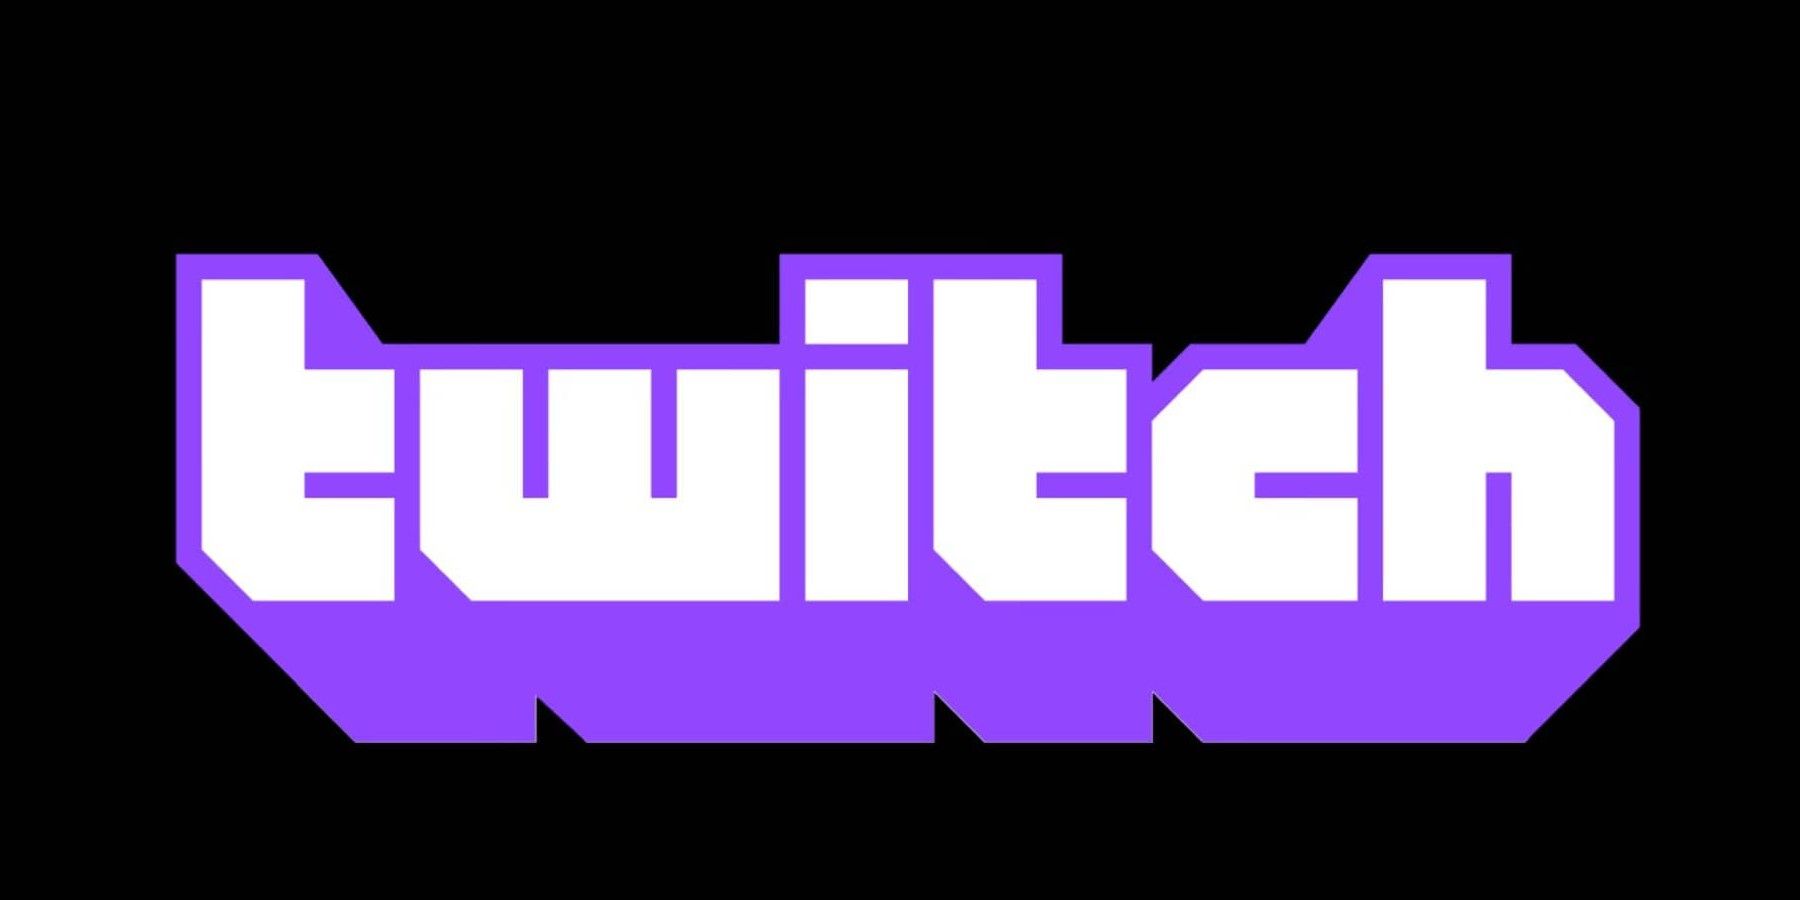 twitch purple text with black background